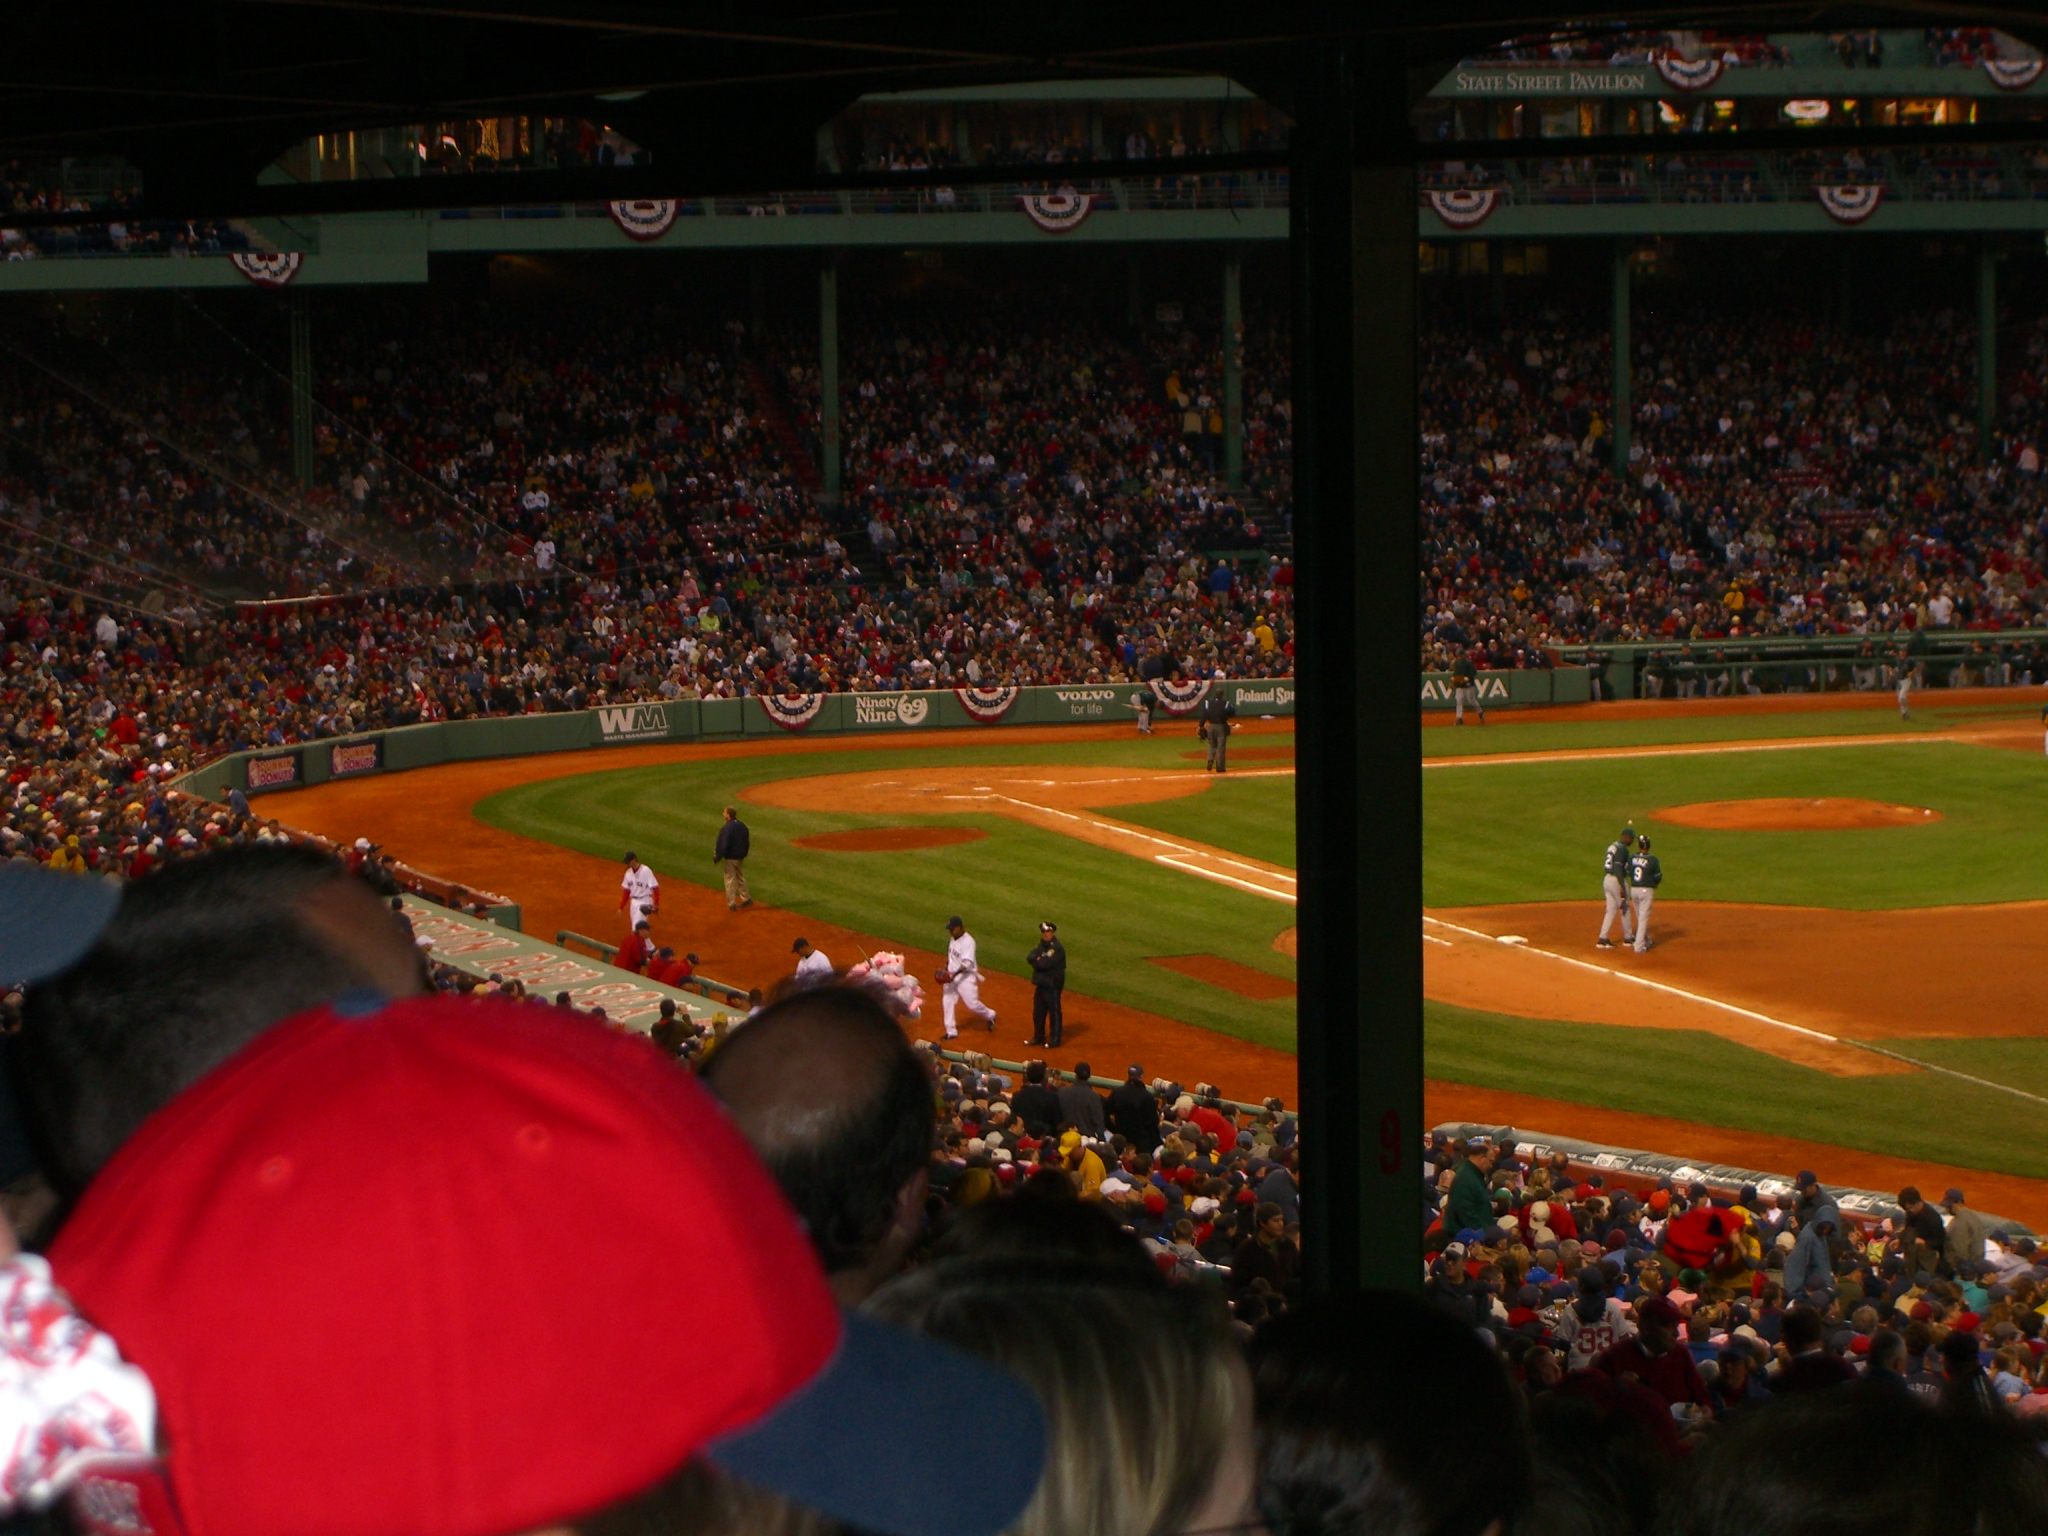 the crowd watching baseball game on the field